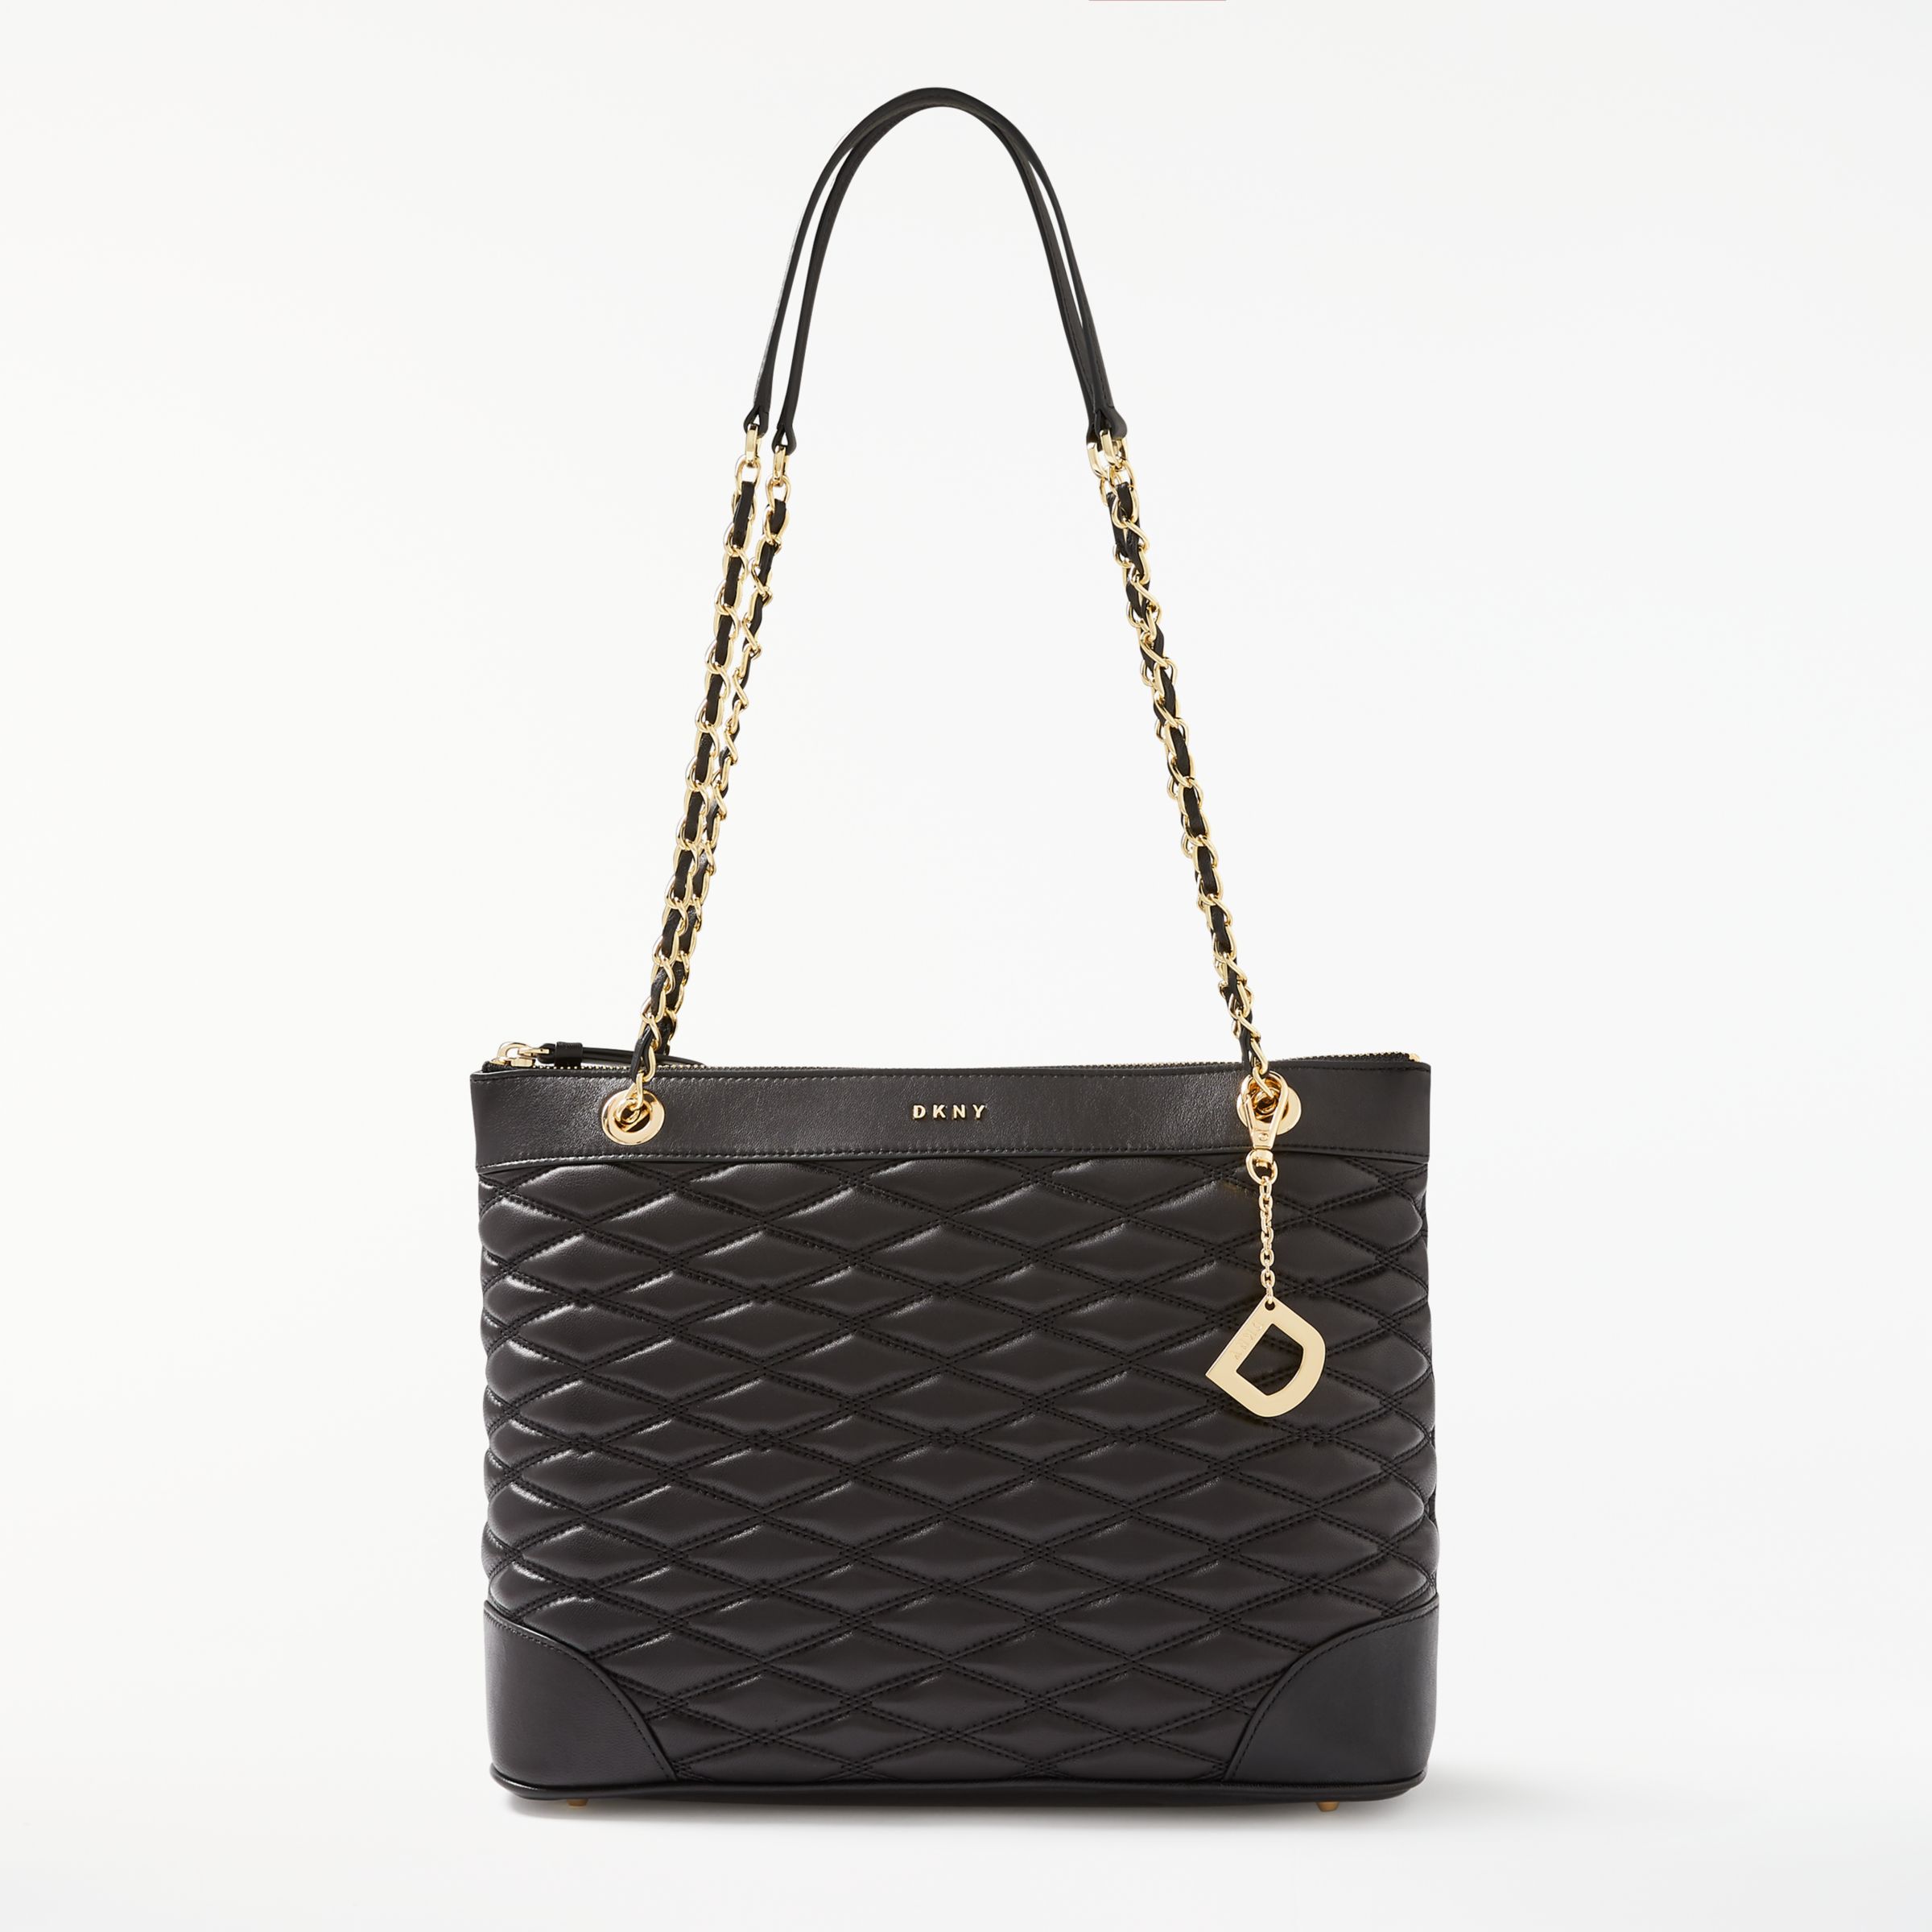 DKNY Nappa Leather Quilted Medium Tote Bag, Black at John Lewis